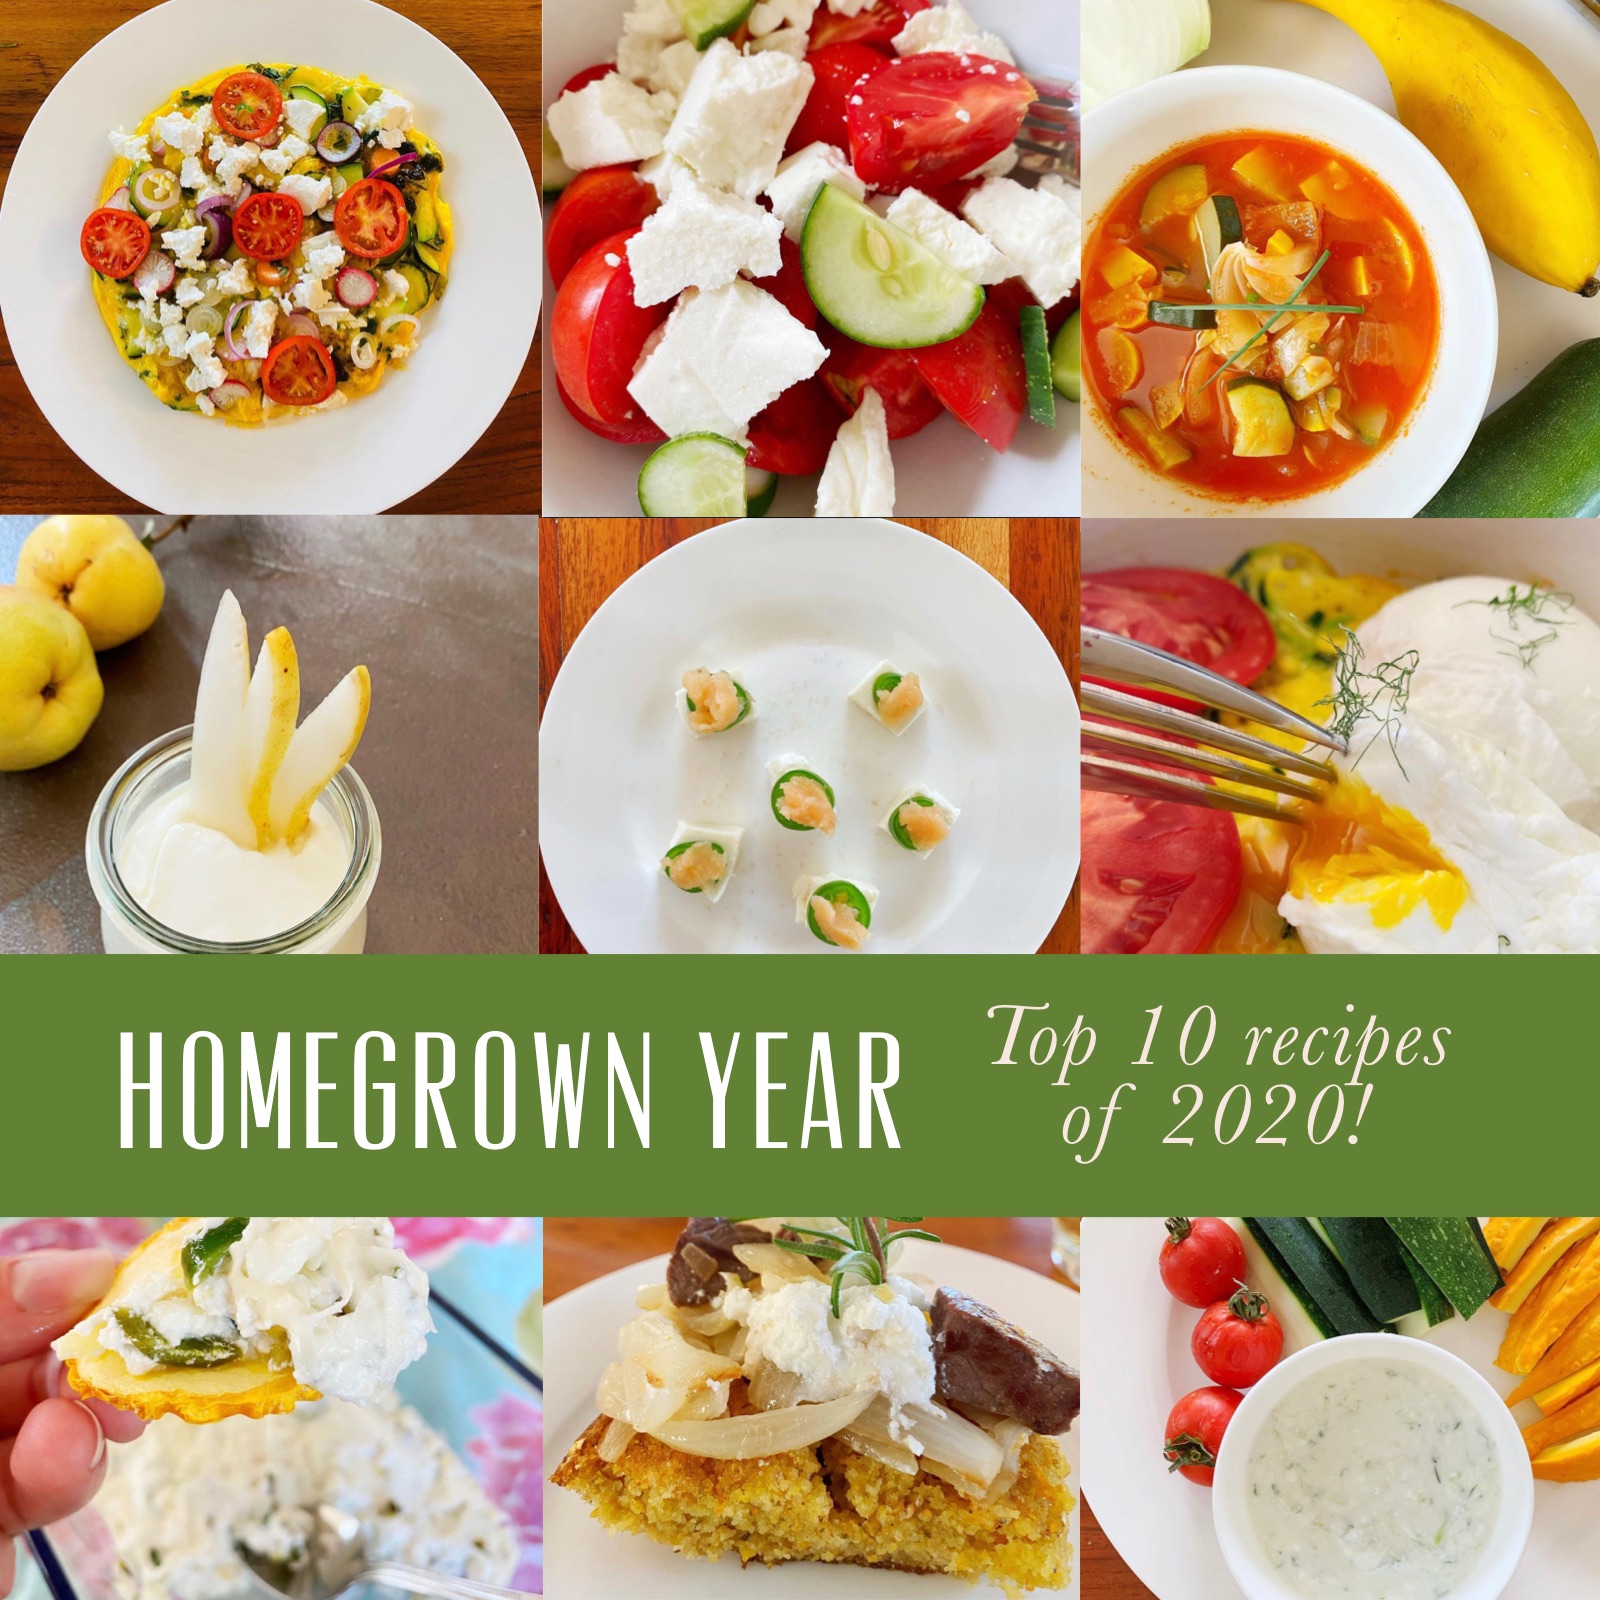 The Top 10 Homegrown Year Recipes of 2020